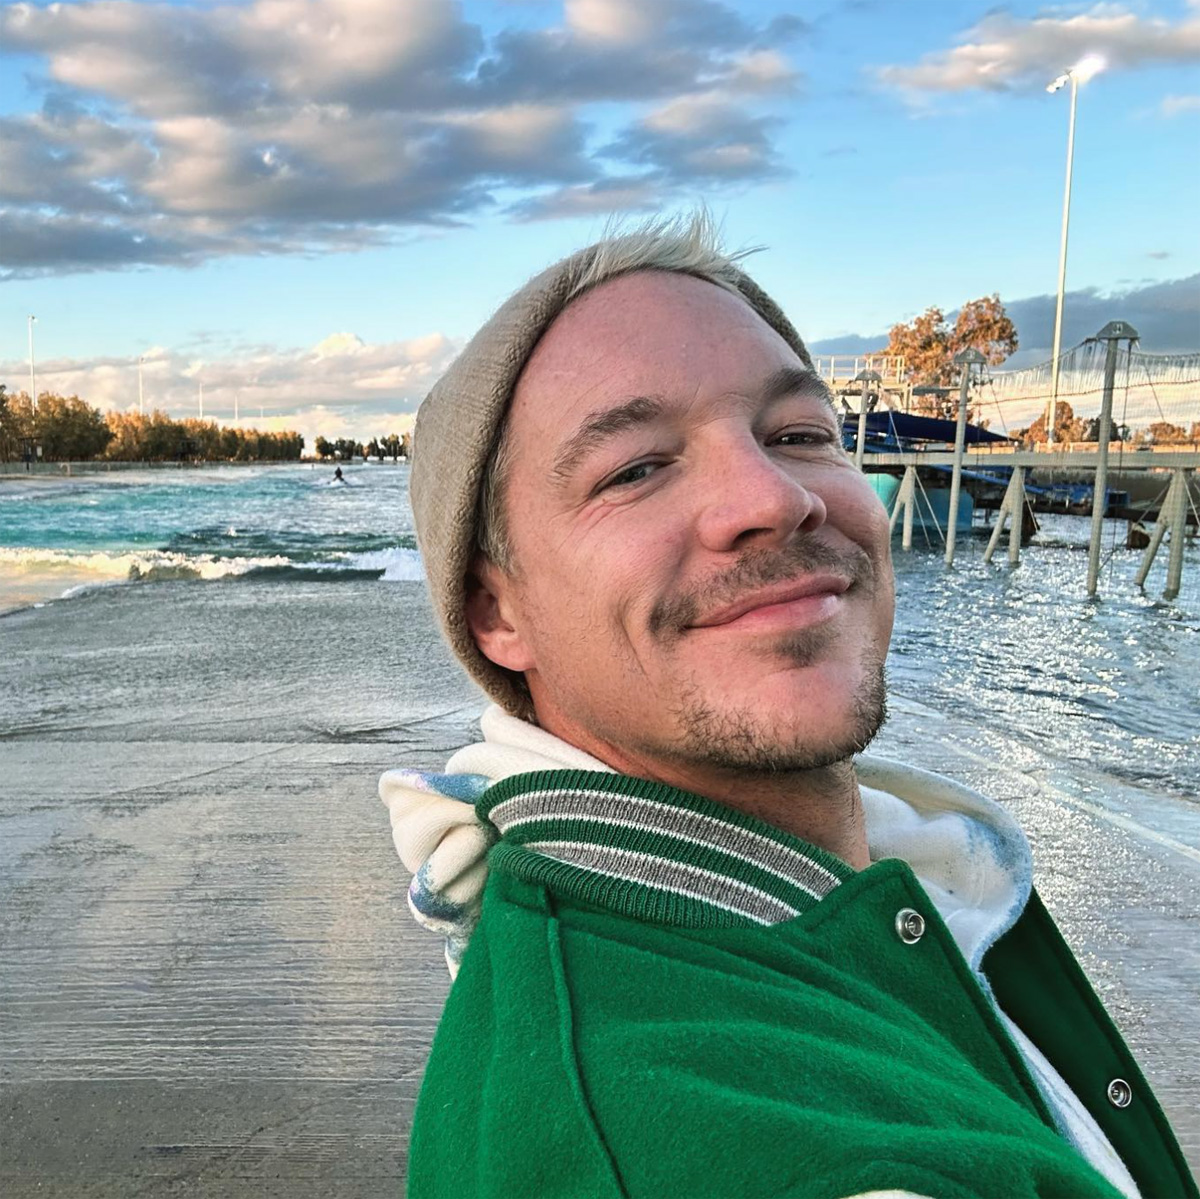 Nude Beach Girls Blowjob - Diplo Says He's Hooked Up With Men In The Past - Metro Weekly